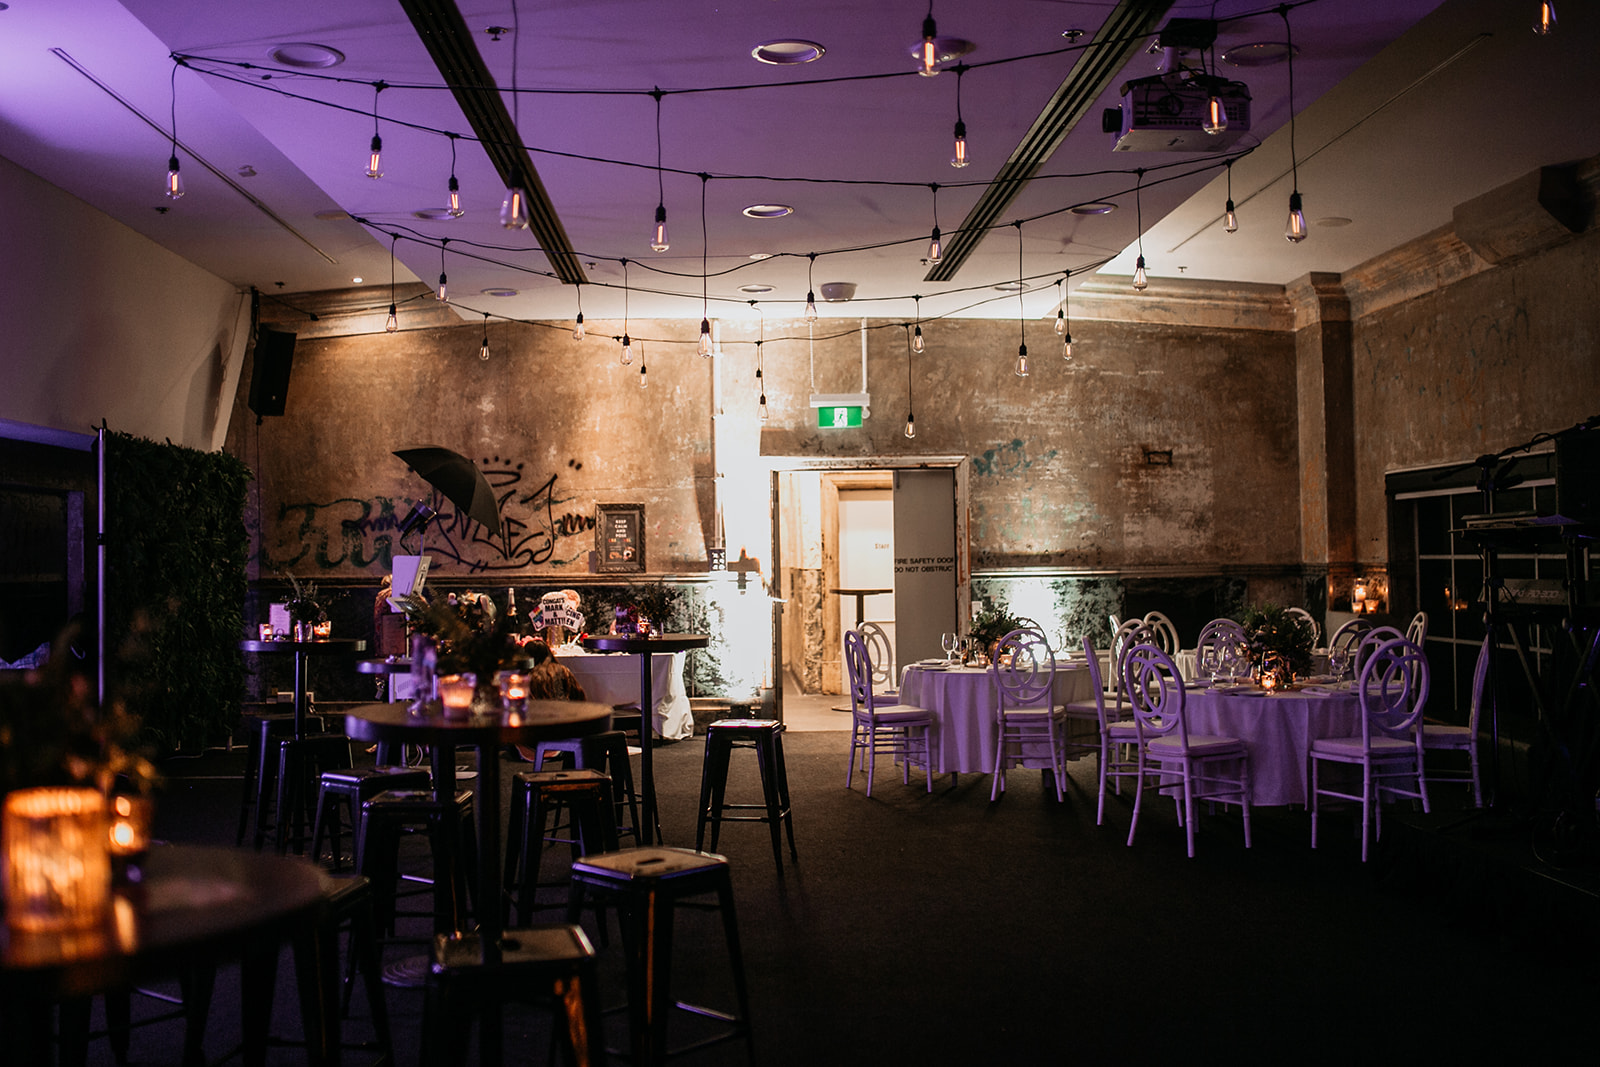 Industrial Chic Wedding by Foreva Events Brisbane Wedding Planner and Stylist